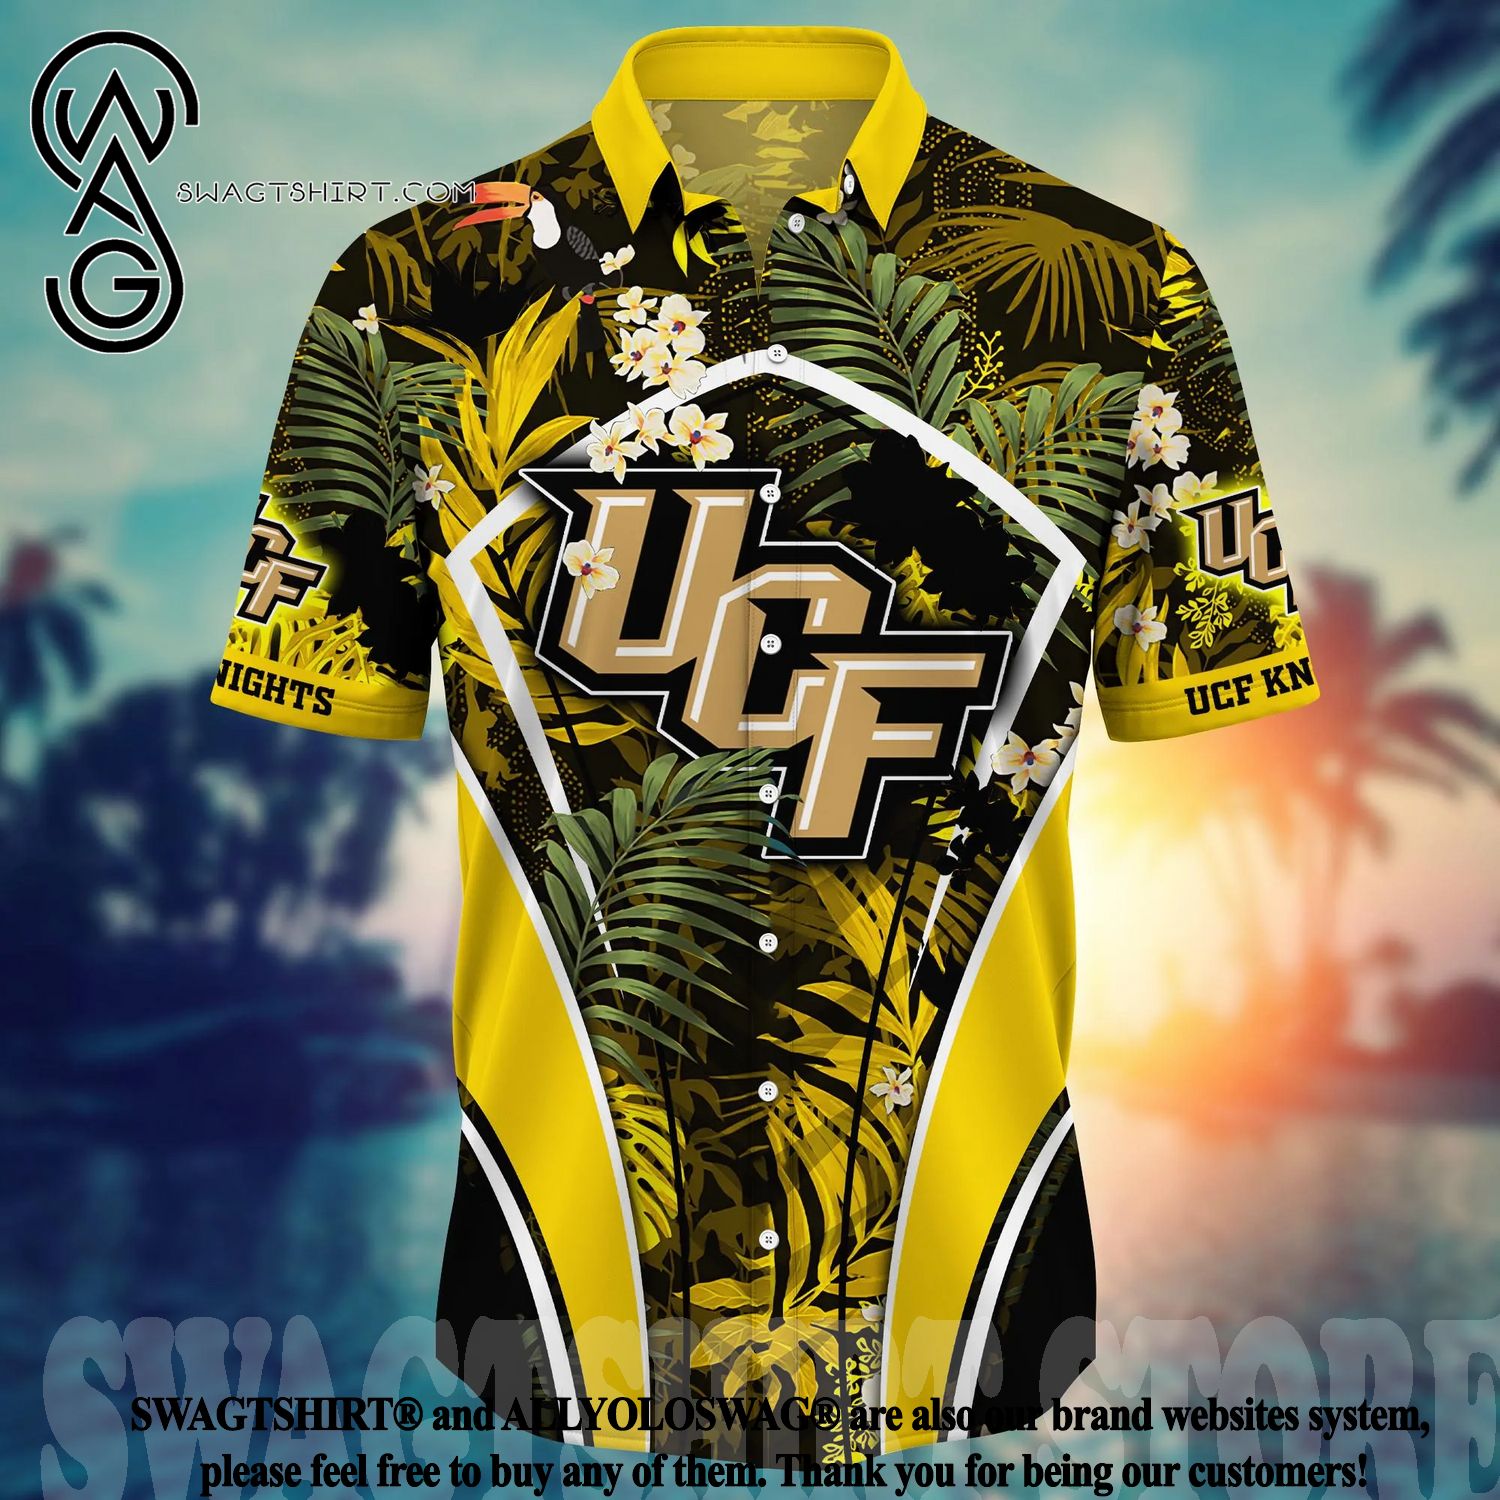 LIMITED] UCF Knights Summer Hawaiian Shirt And Shorts, With Tropical  Patterns For Fans